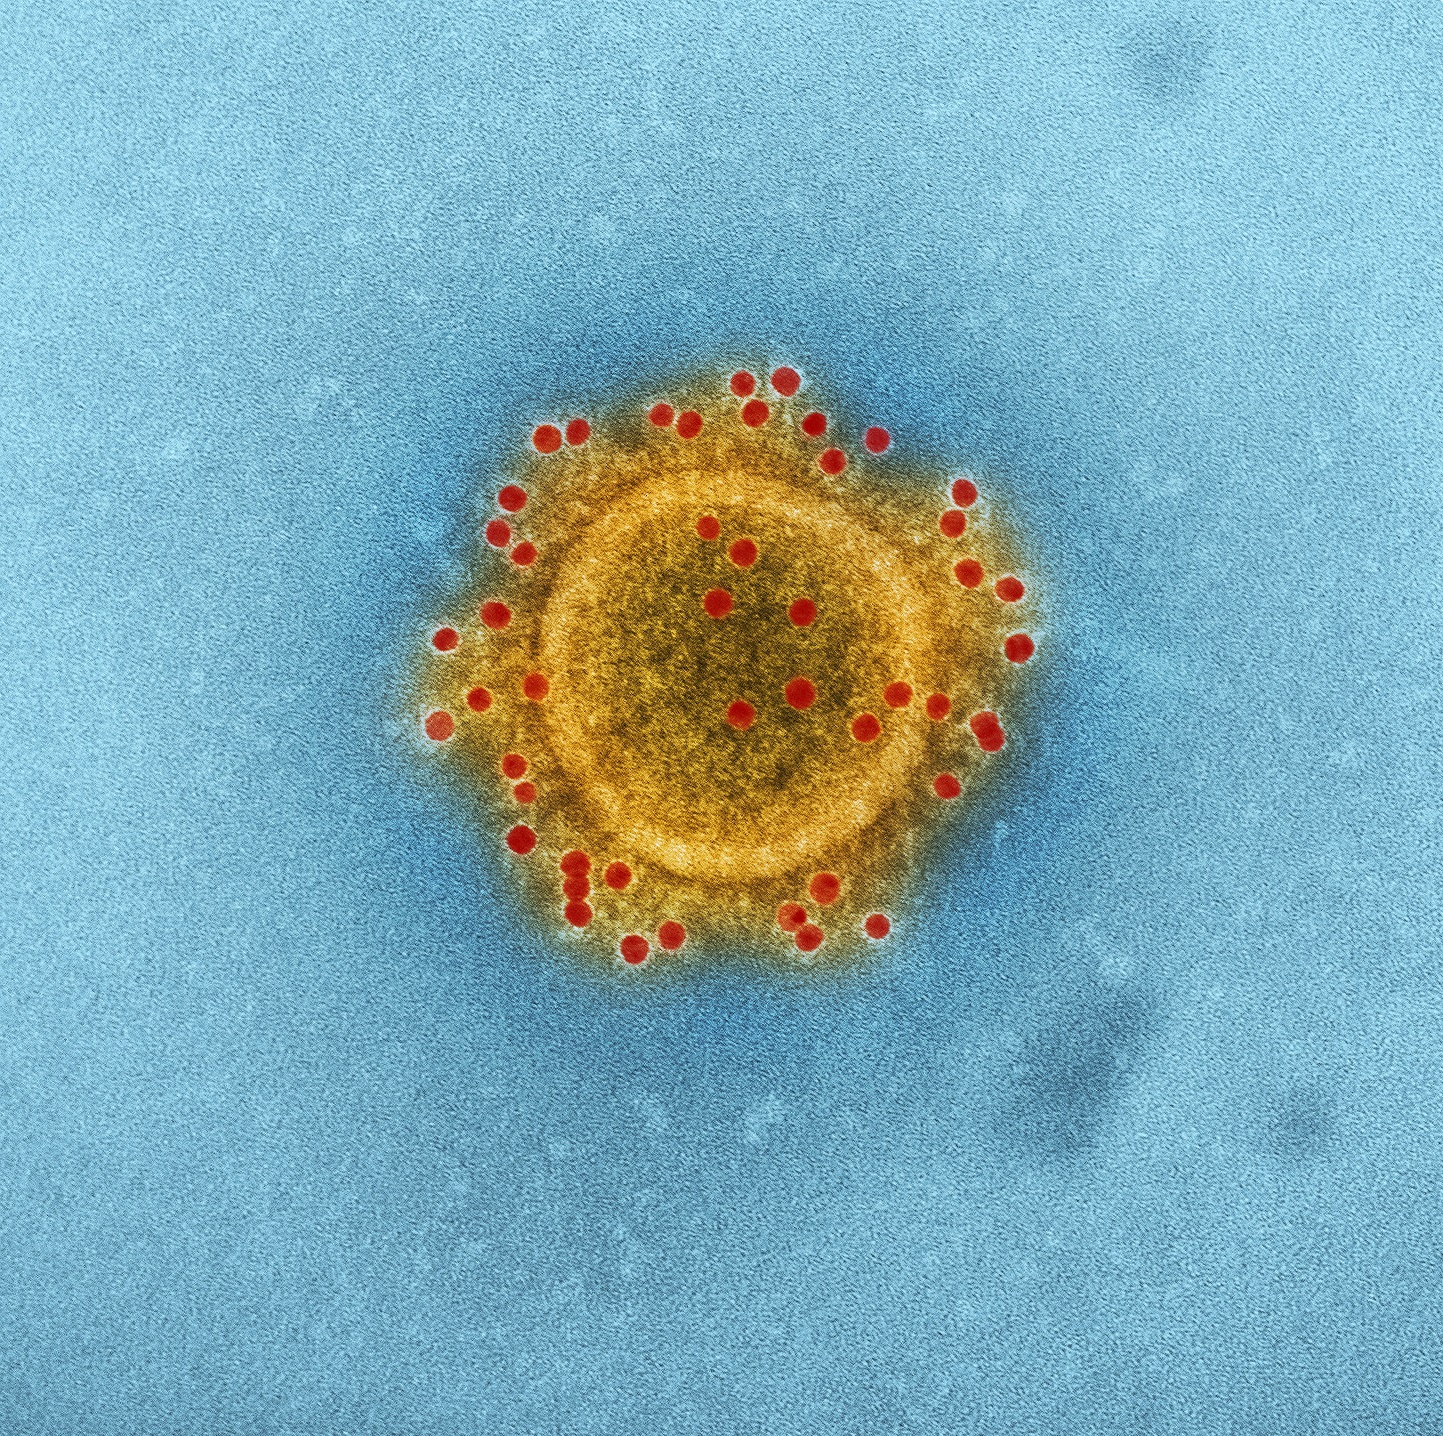 Vasomune’s Lead Investigational Medication is Connected to the Fight Against Coronavirus